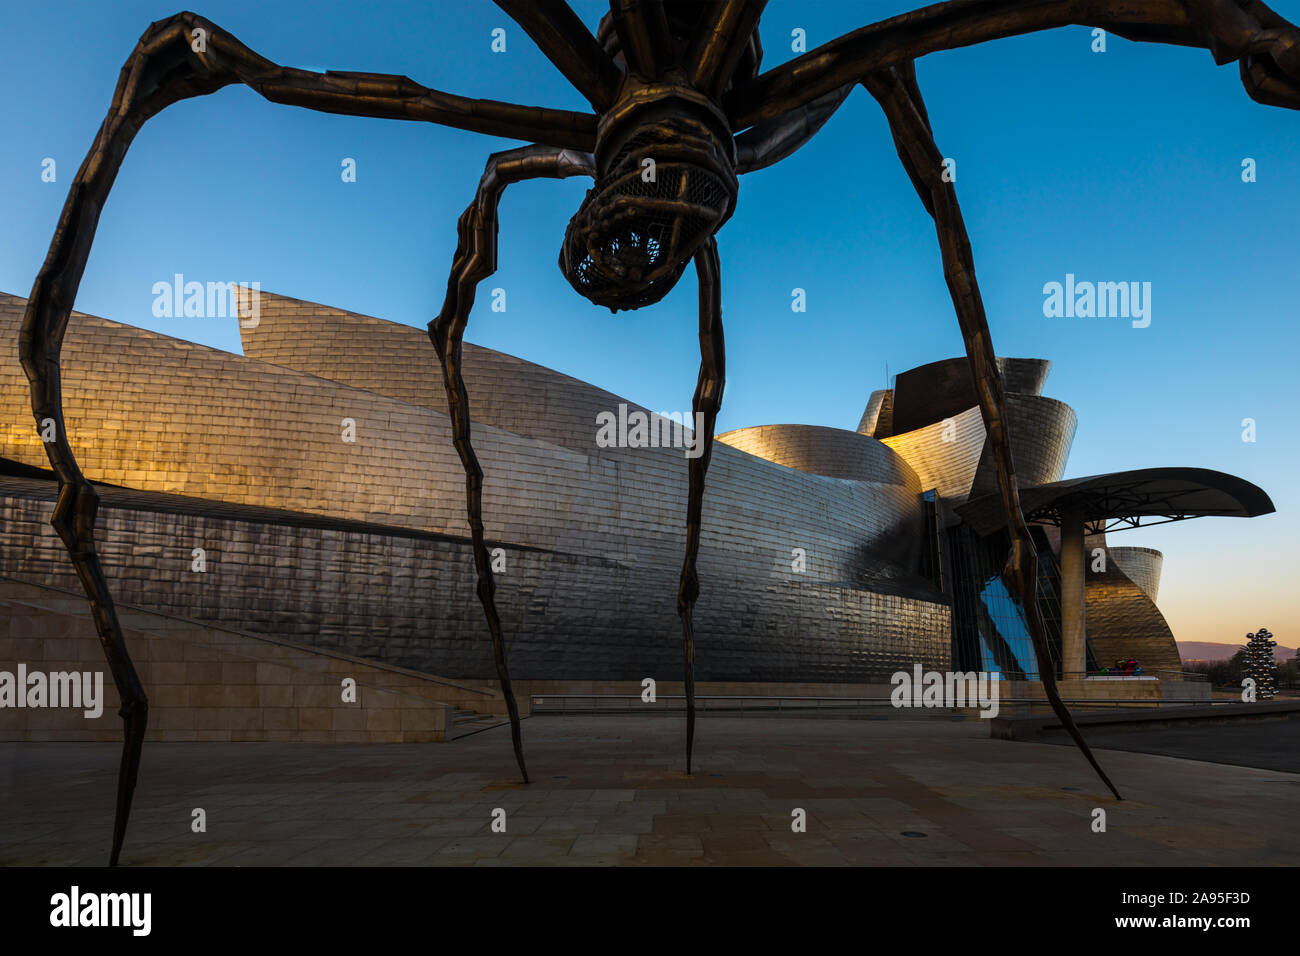 Maman spider sculpture by artist Louise Bourgeois outside the Guggenheim Museum at sunrise, Nervión River, Bilbao, Basque Country, Spain Stock Photo